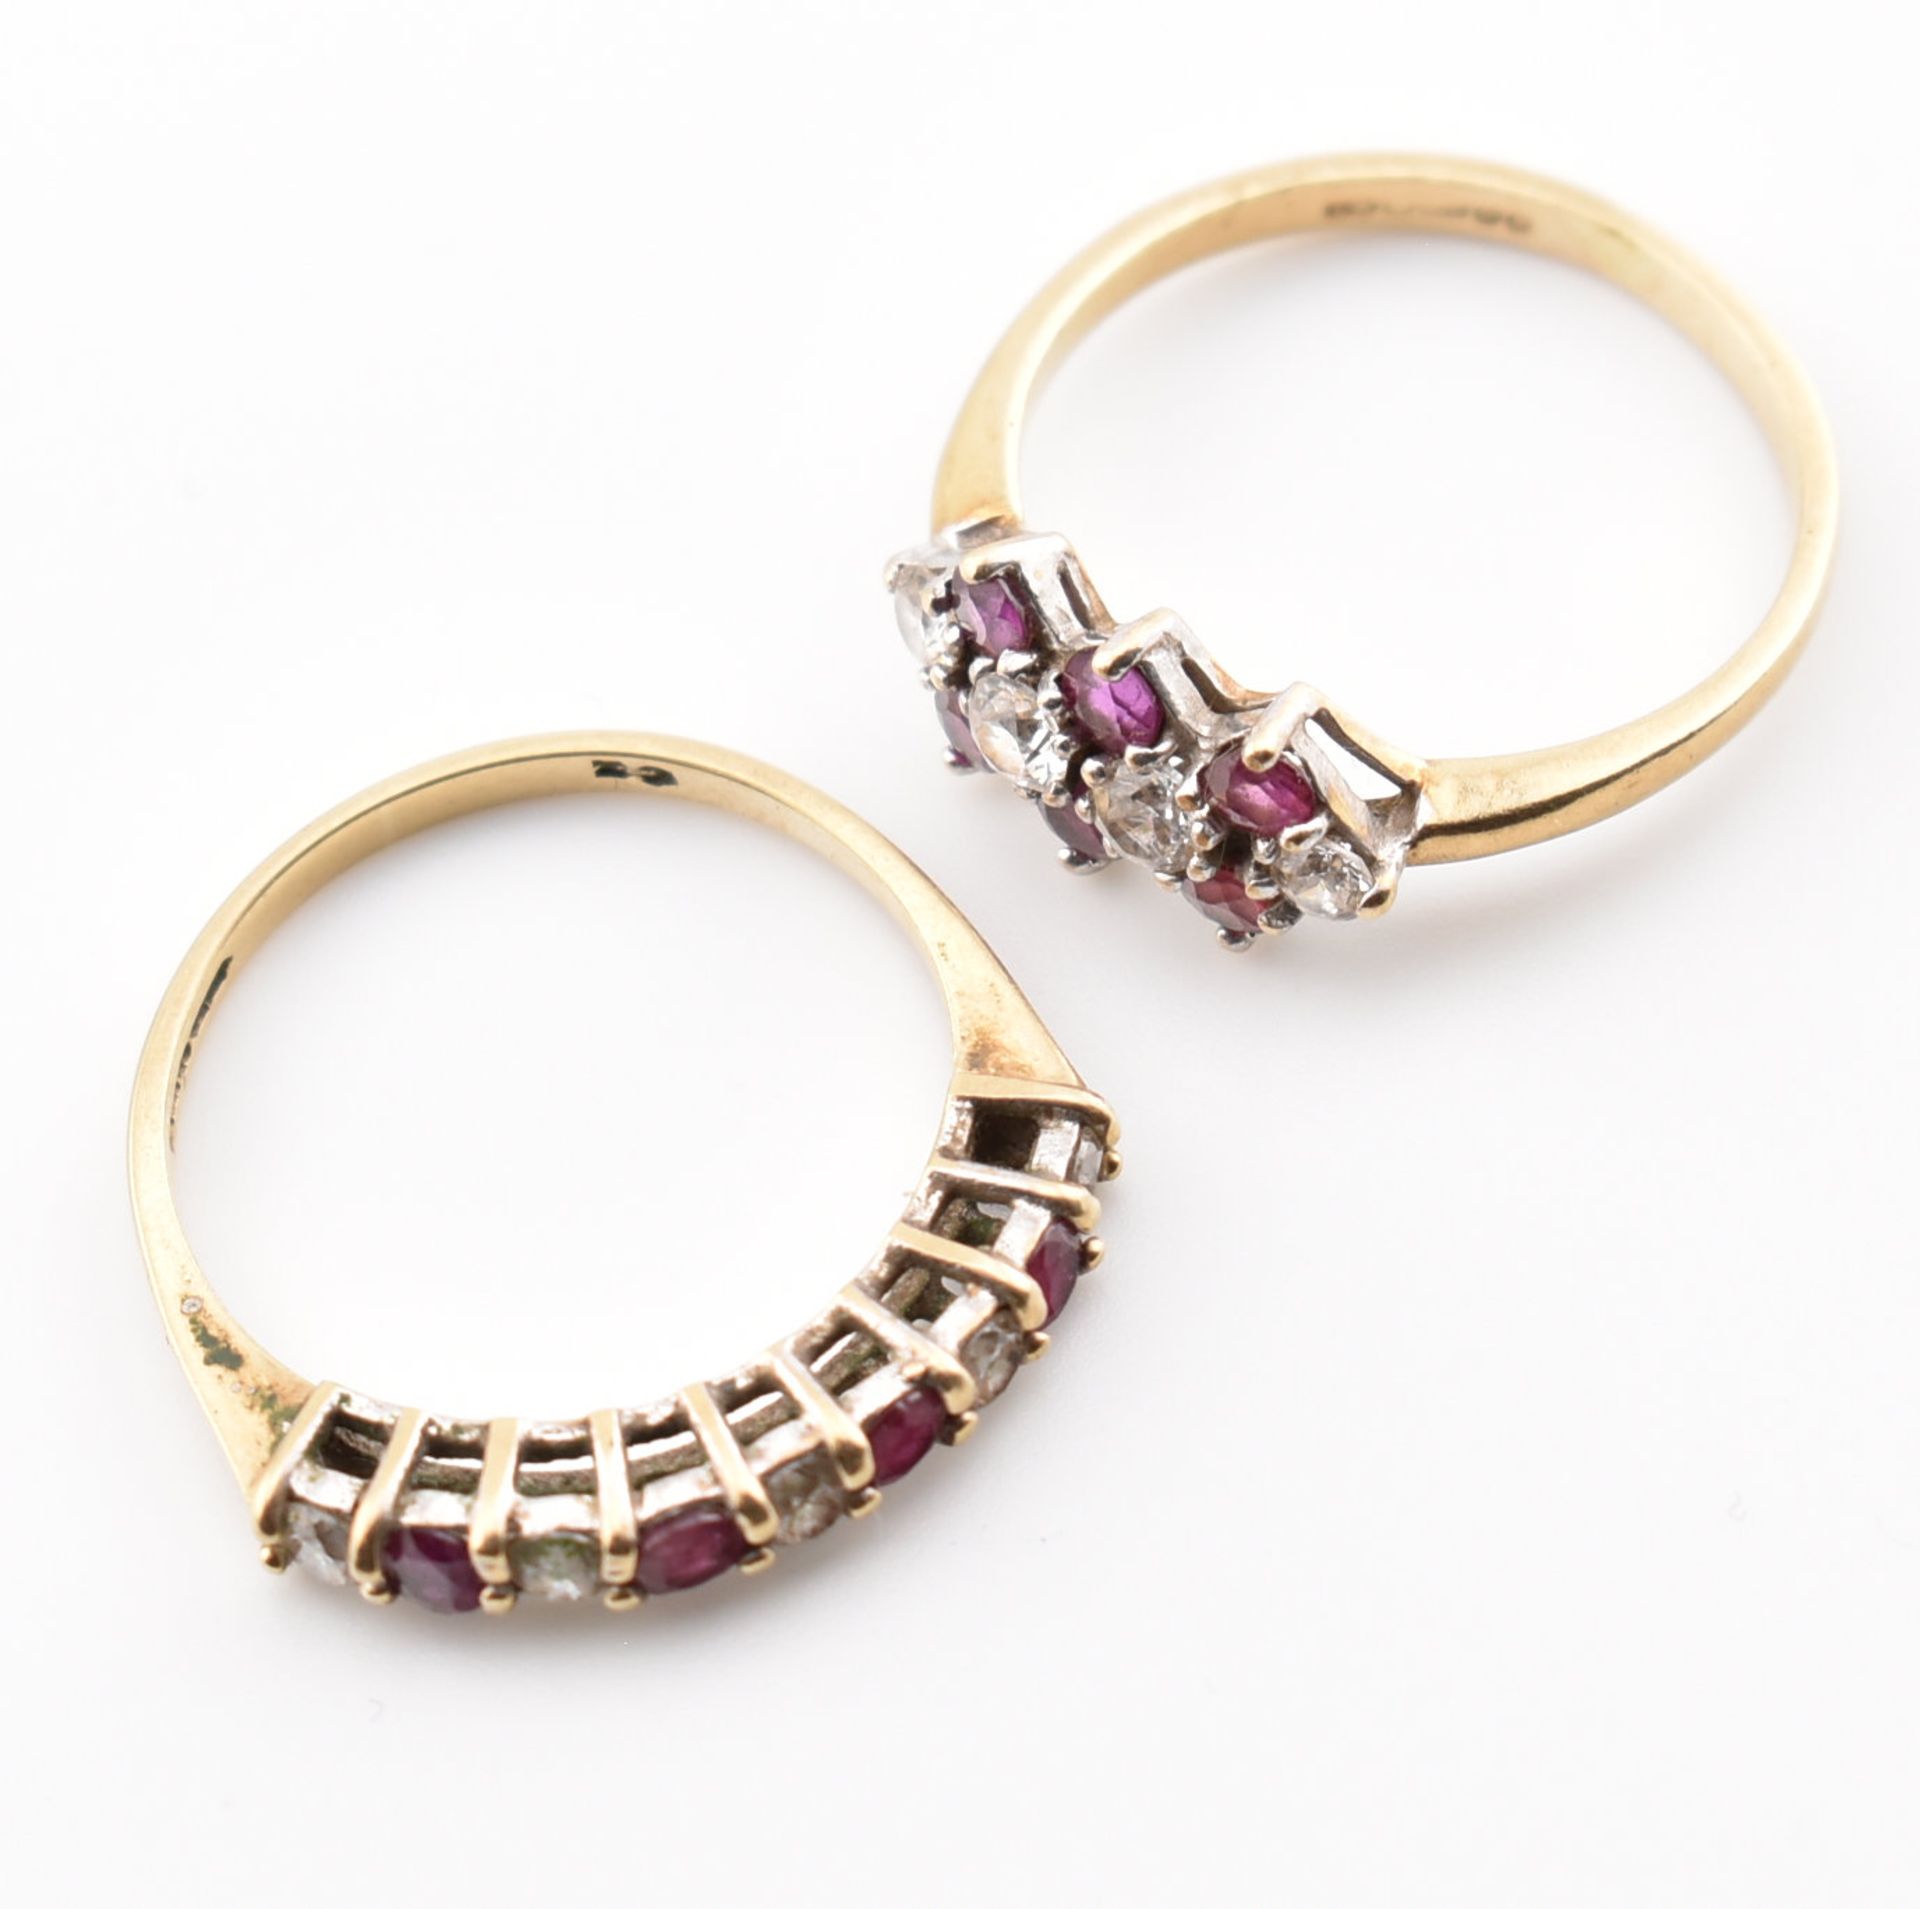 TWO HALLMARKED 9CT GOLD RUBY & WHITE STONE RINGS - Image 3 of 9